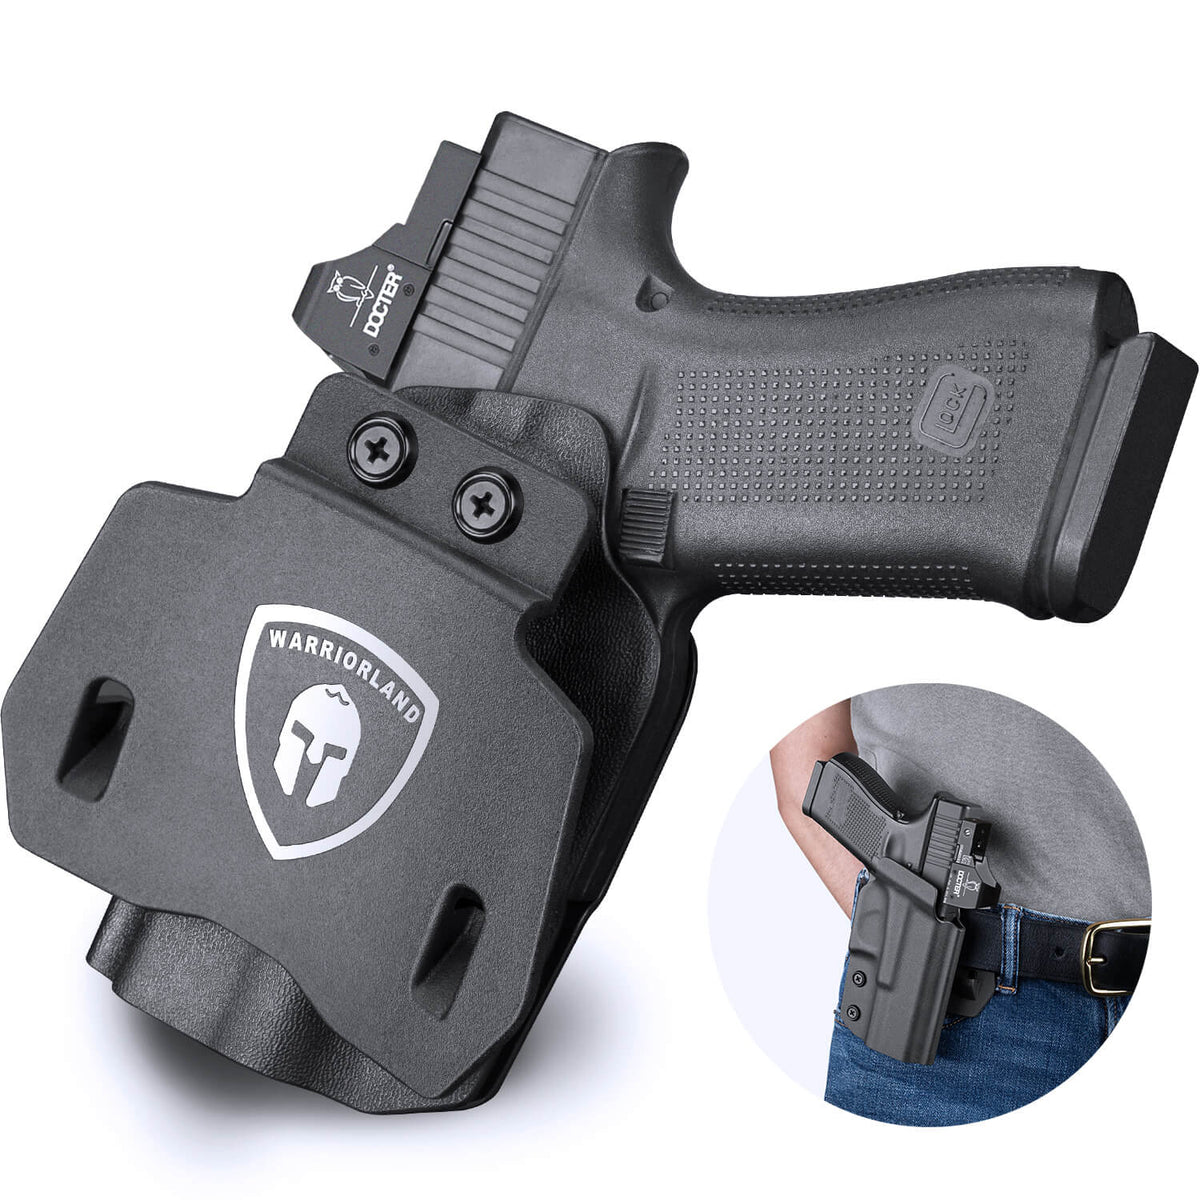 Kydex OWB Holster for Glock 43 43x with Paddle Appendix Open Carry Red Dot Optics Cut Trigger Guard Right/ Left | WARRIORLAND